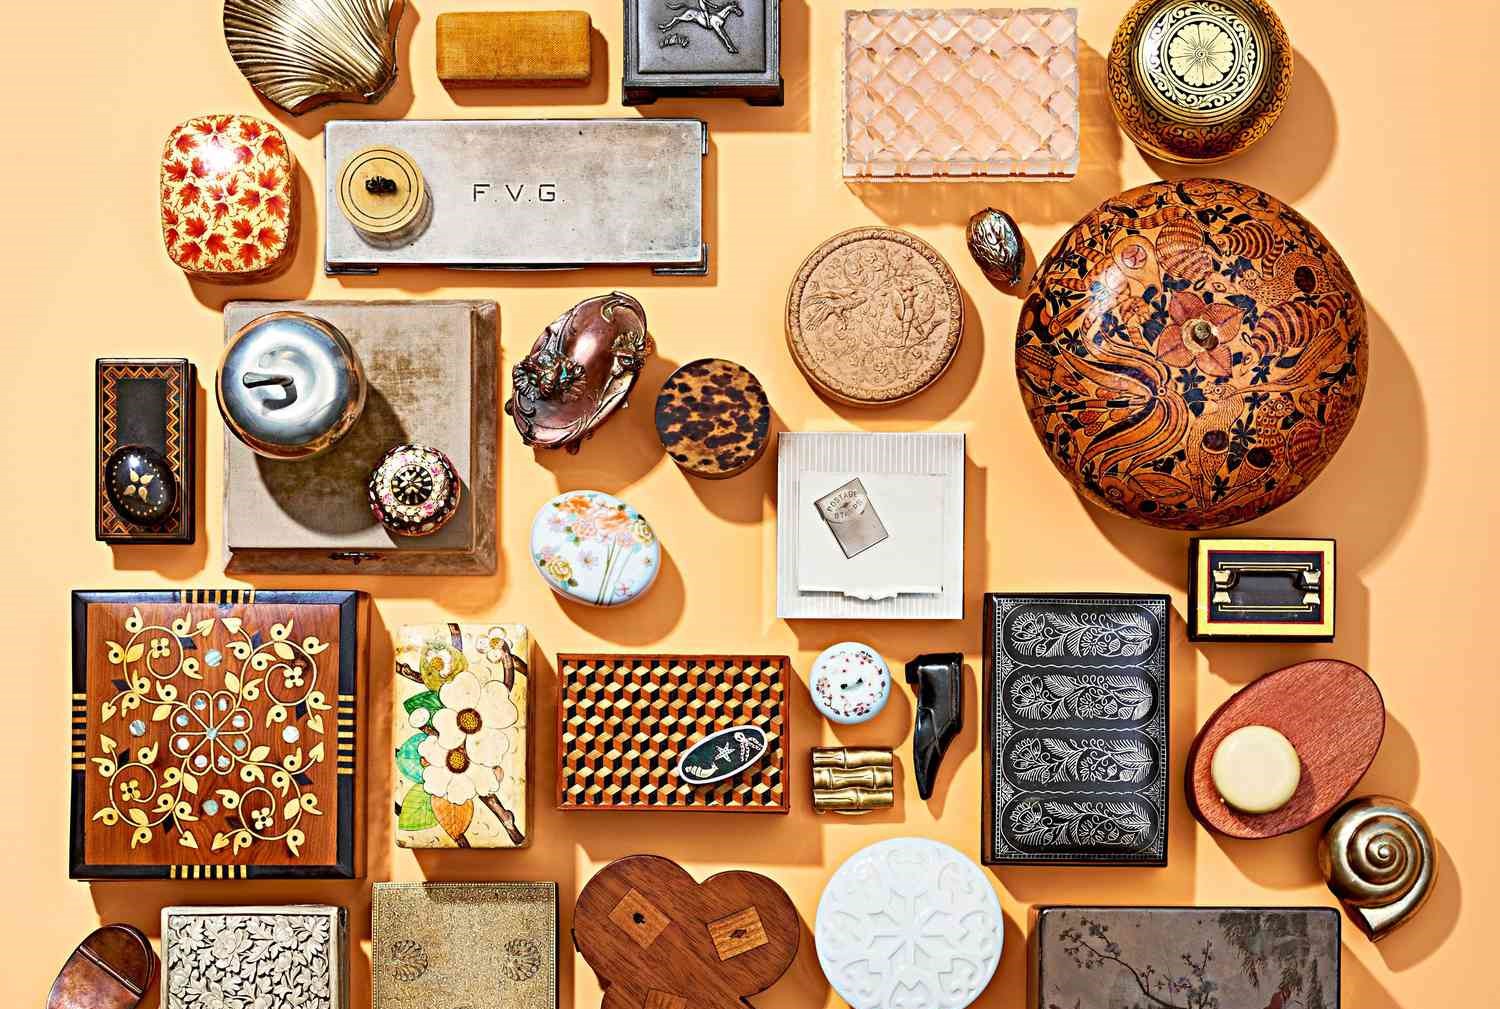 19-extraordinary-facts-about-collecting-vintage-items